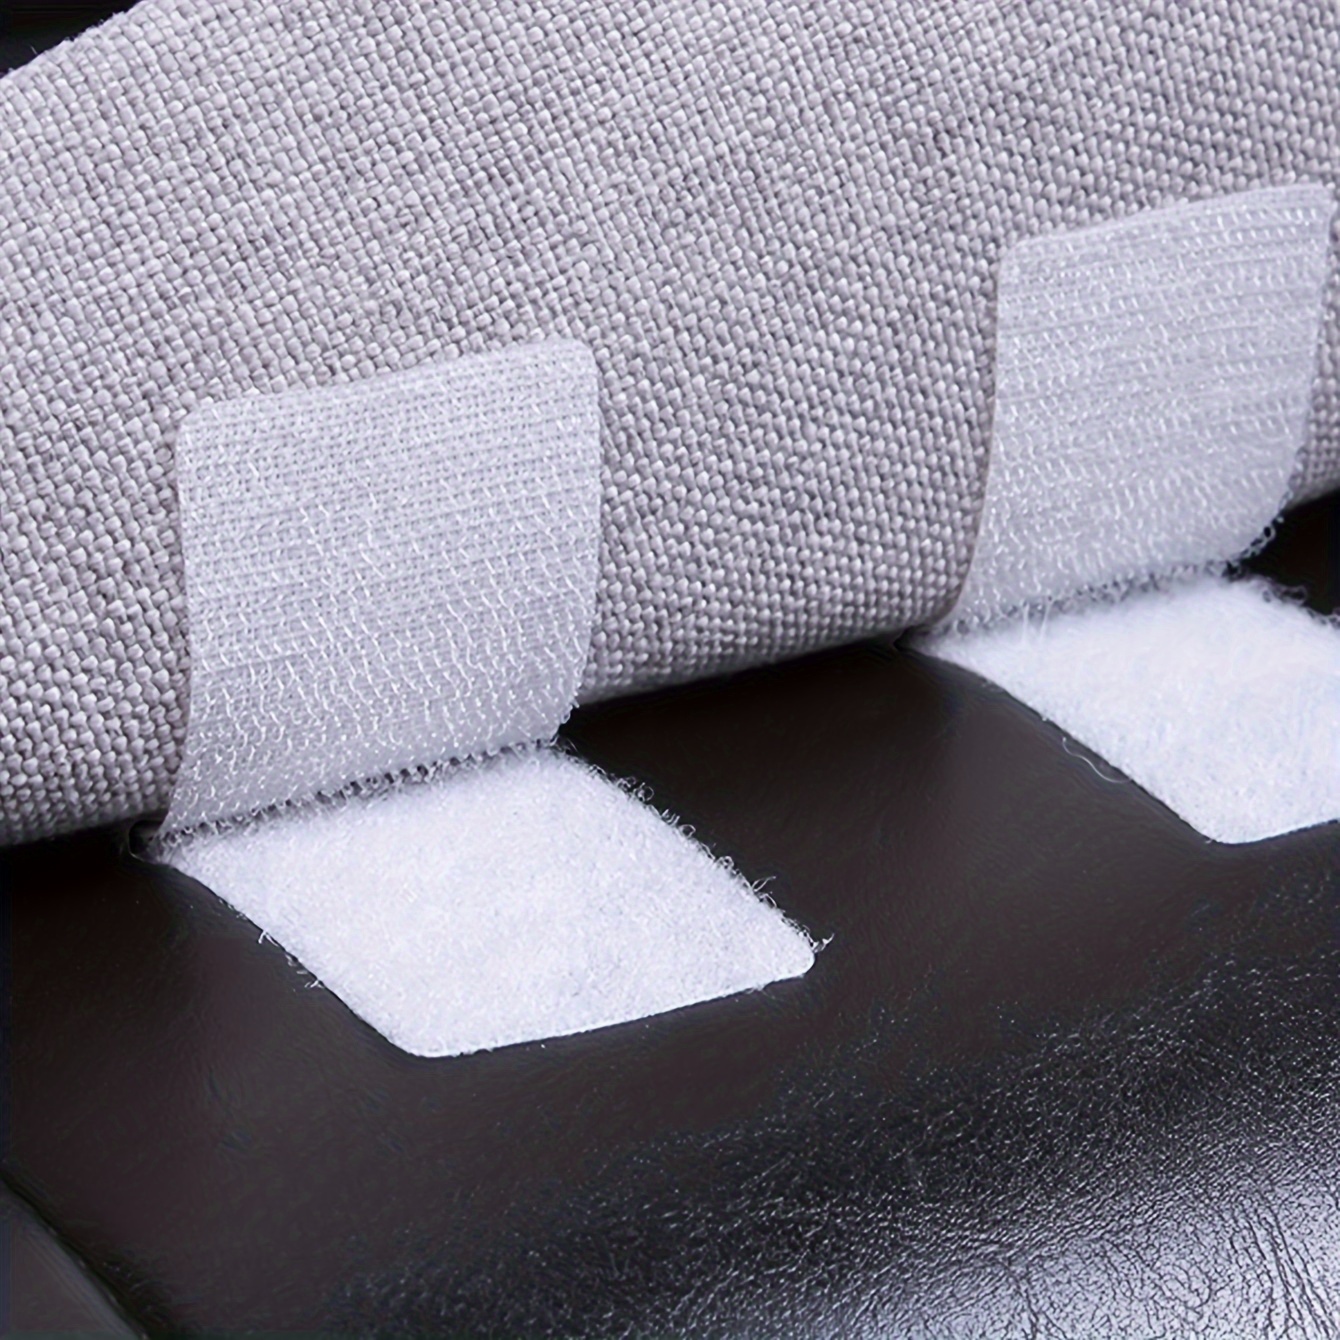  TEUVO Couch Cushion Non Slip Pads to Keep Couch Cushions from  Sliding, Hook and Loop Tape with Adhesive for Smooth Surfaces, 2m Long and  11cm Wide